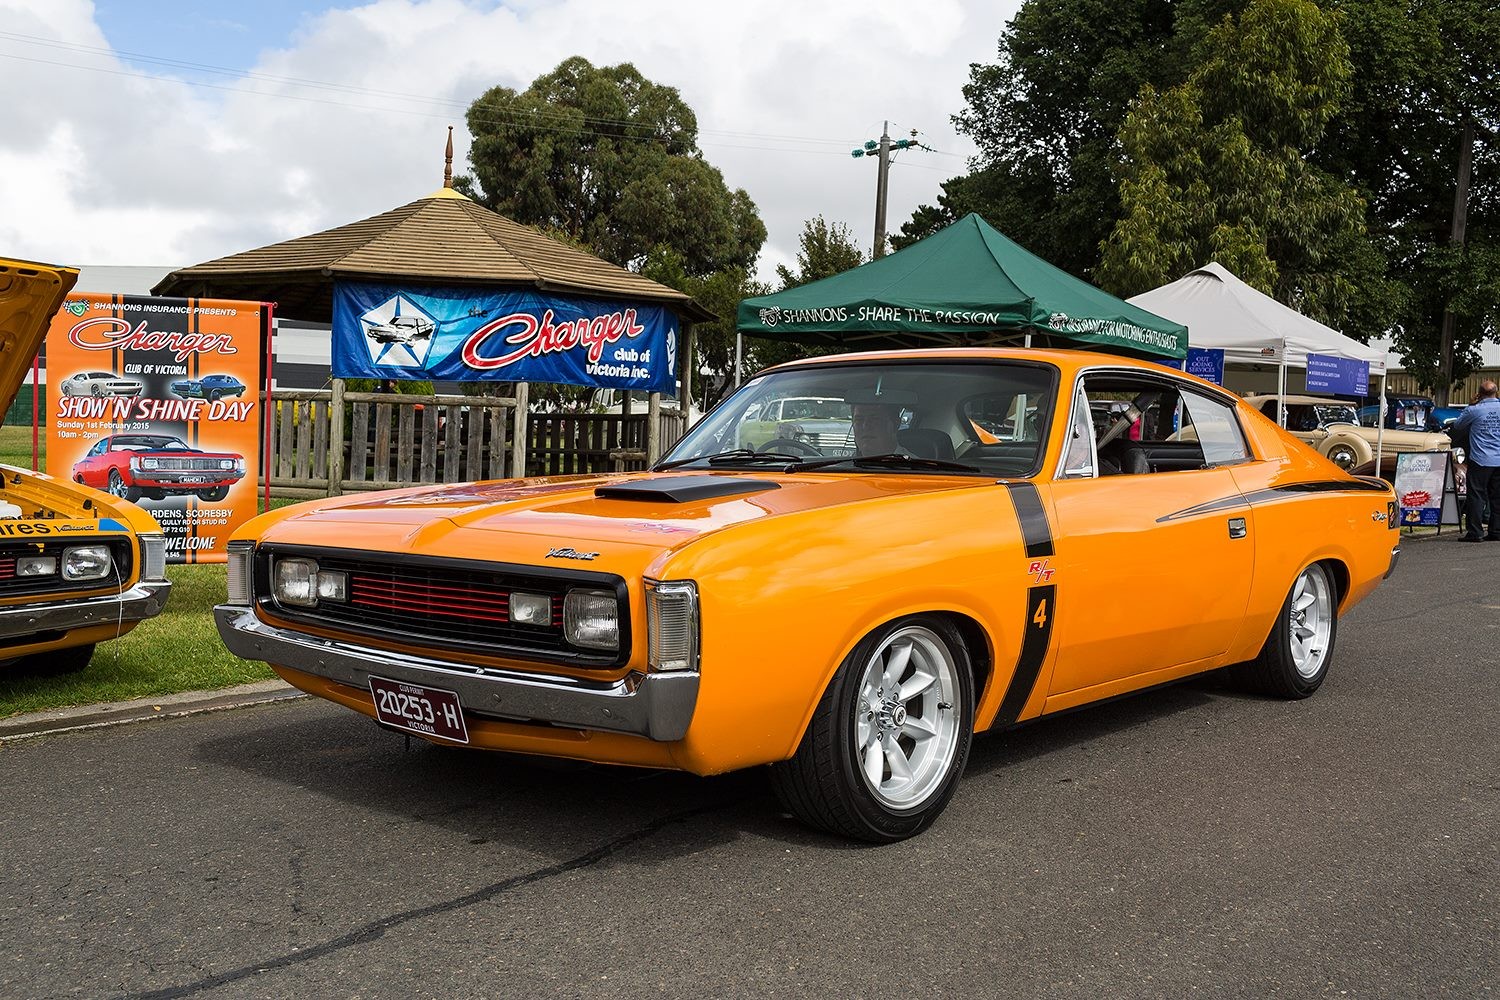 1972 Valiant Charger